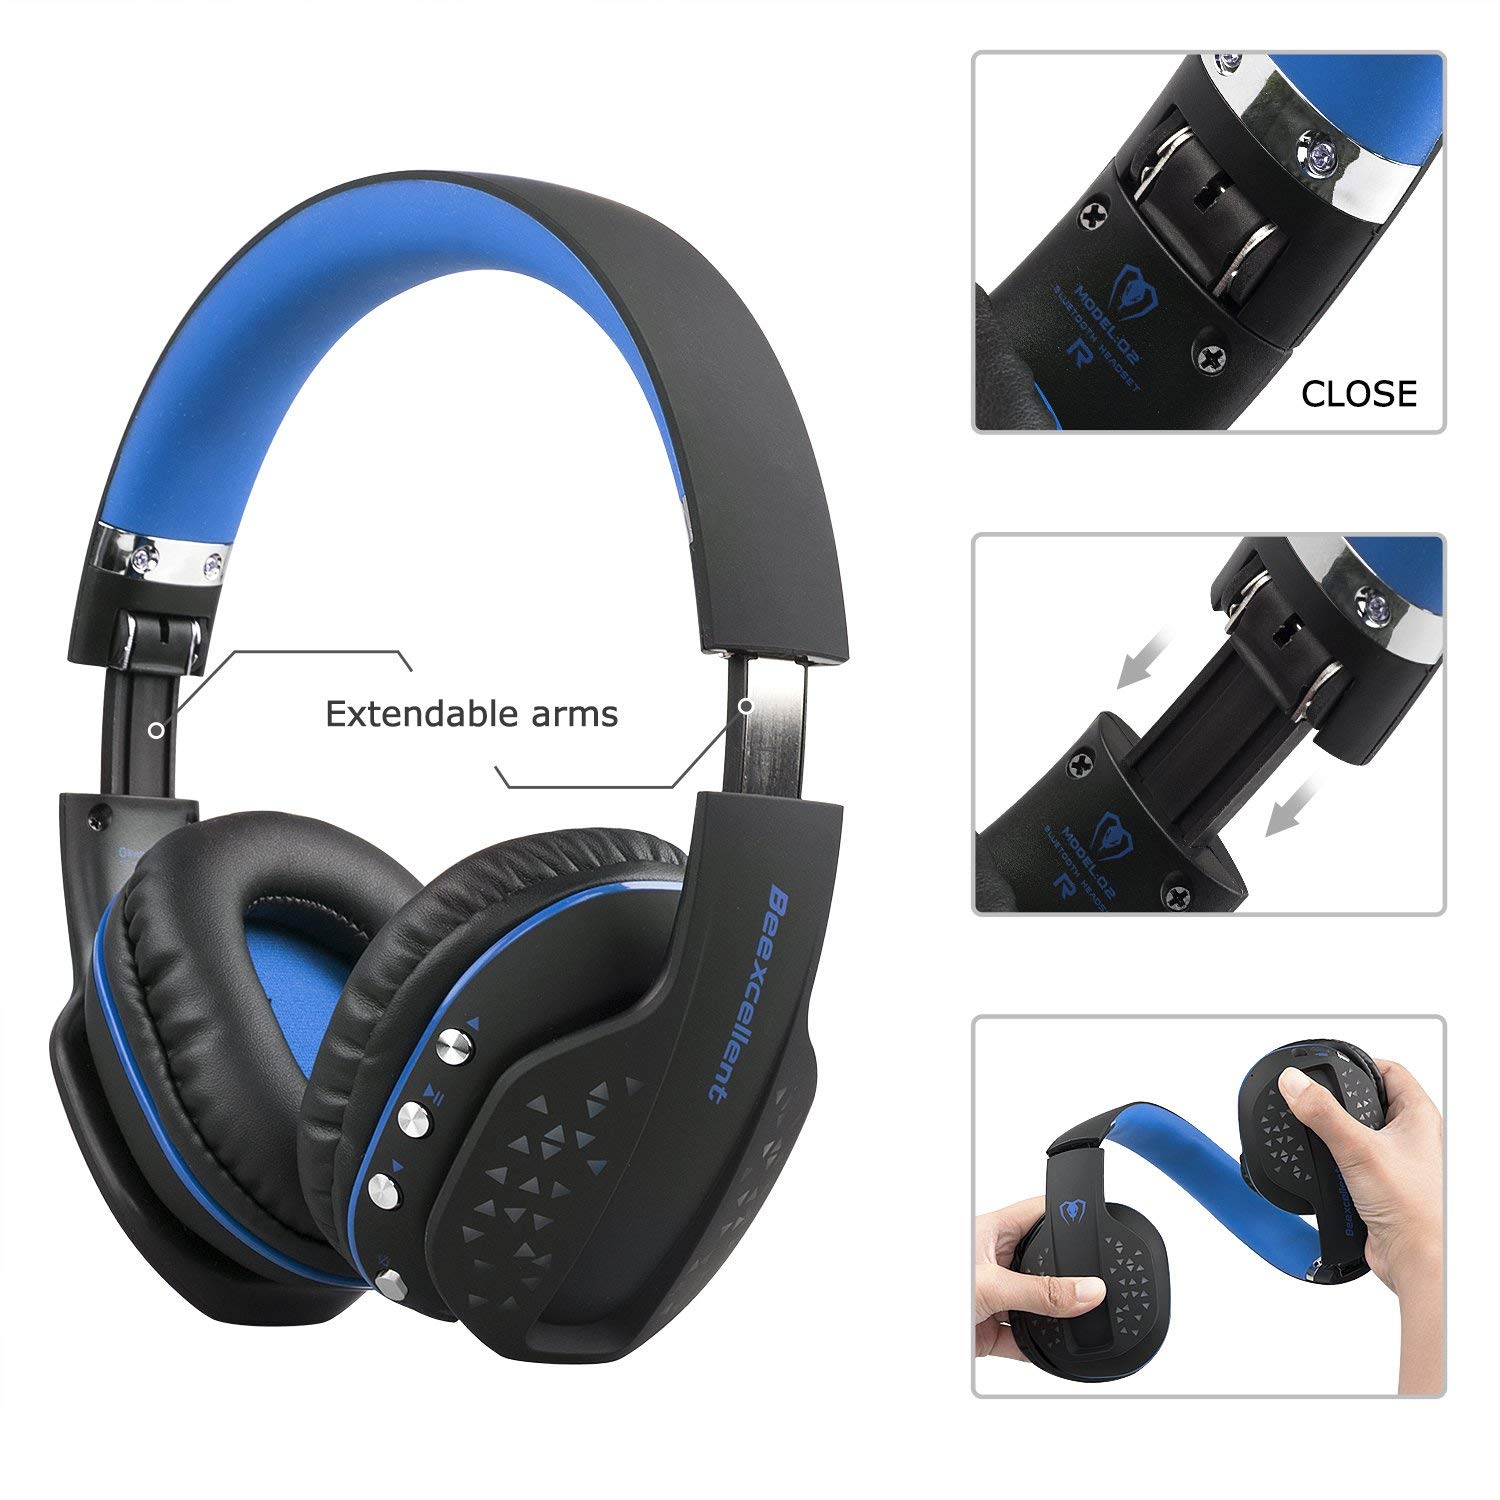 Does Fortnite Support 7.1 Surround Sound